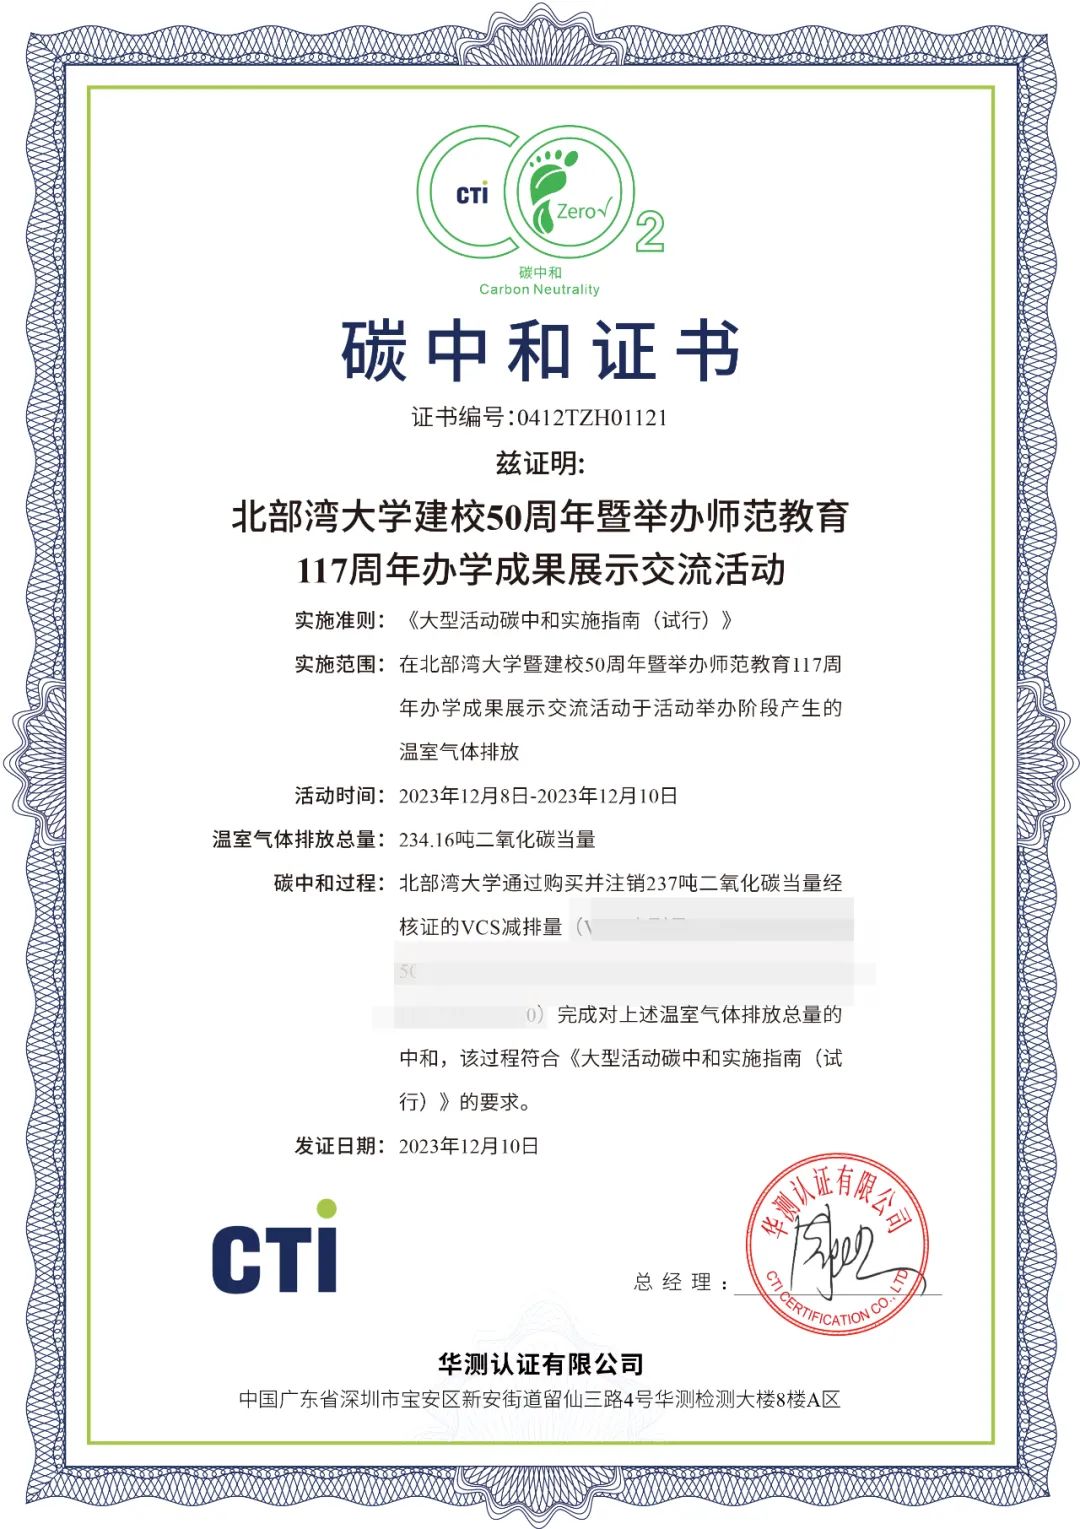 CTI Certification issued the PAS2060 Carbon Neutral Certification for Beibu Gulf University